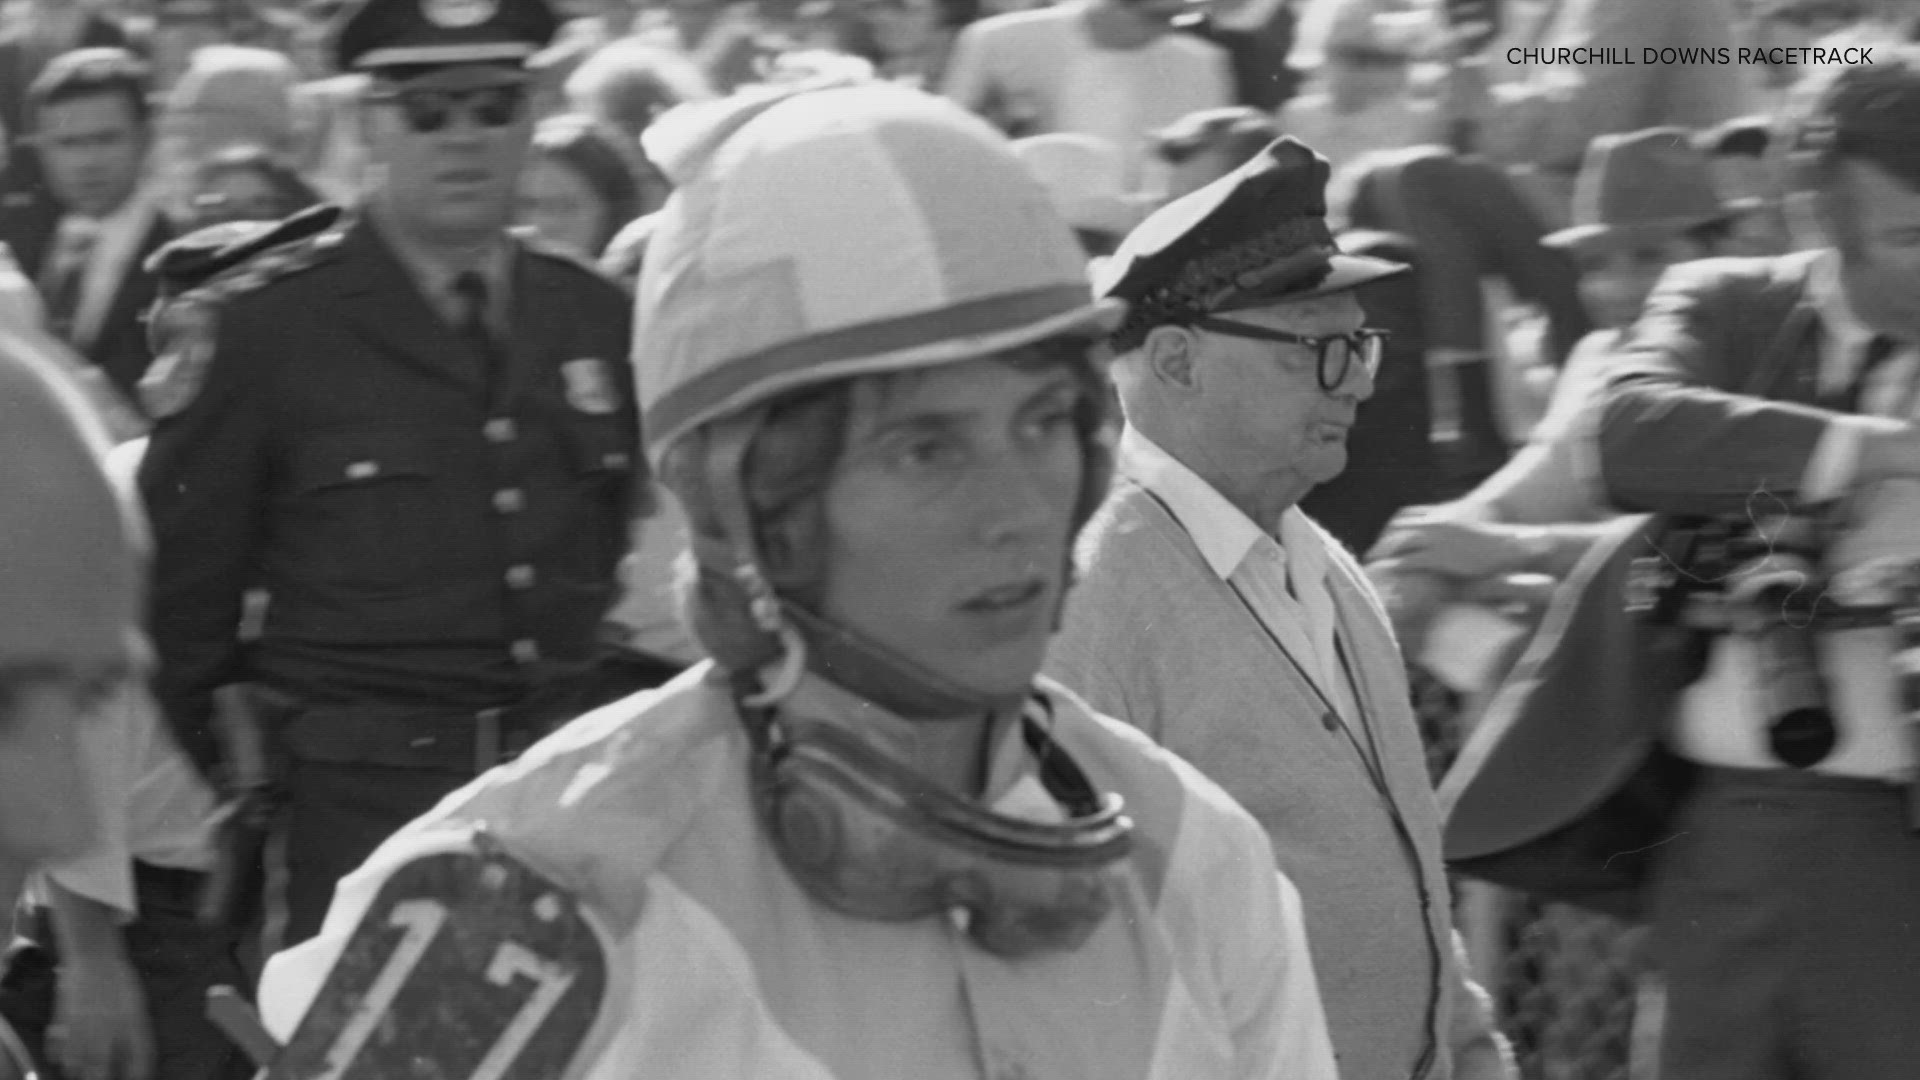 Diane Crump was the first female jockey to ride in the Kentucky Derby in 1970.